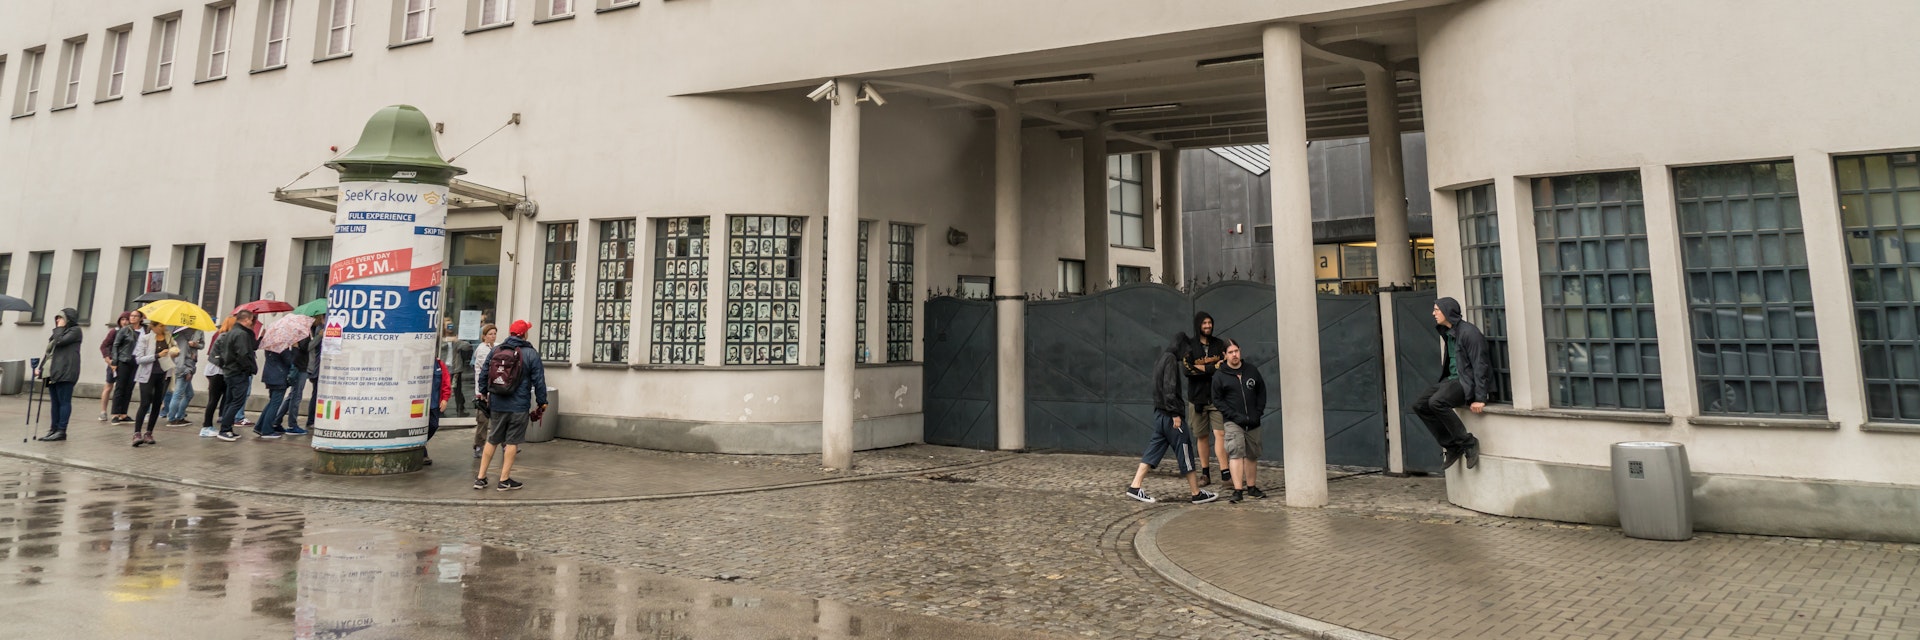 Krakau August 20th 2017: Tourists waiting to enter the former Schindler Factory
862495222
building, cracow, culture, jewish, landmark, oskar, outdoor, polish, schindler, vacation, wall, work, zablocie